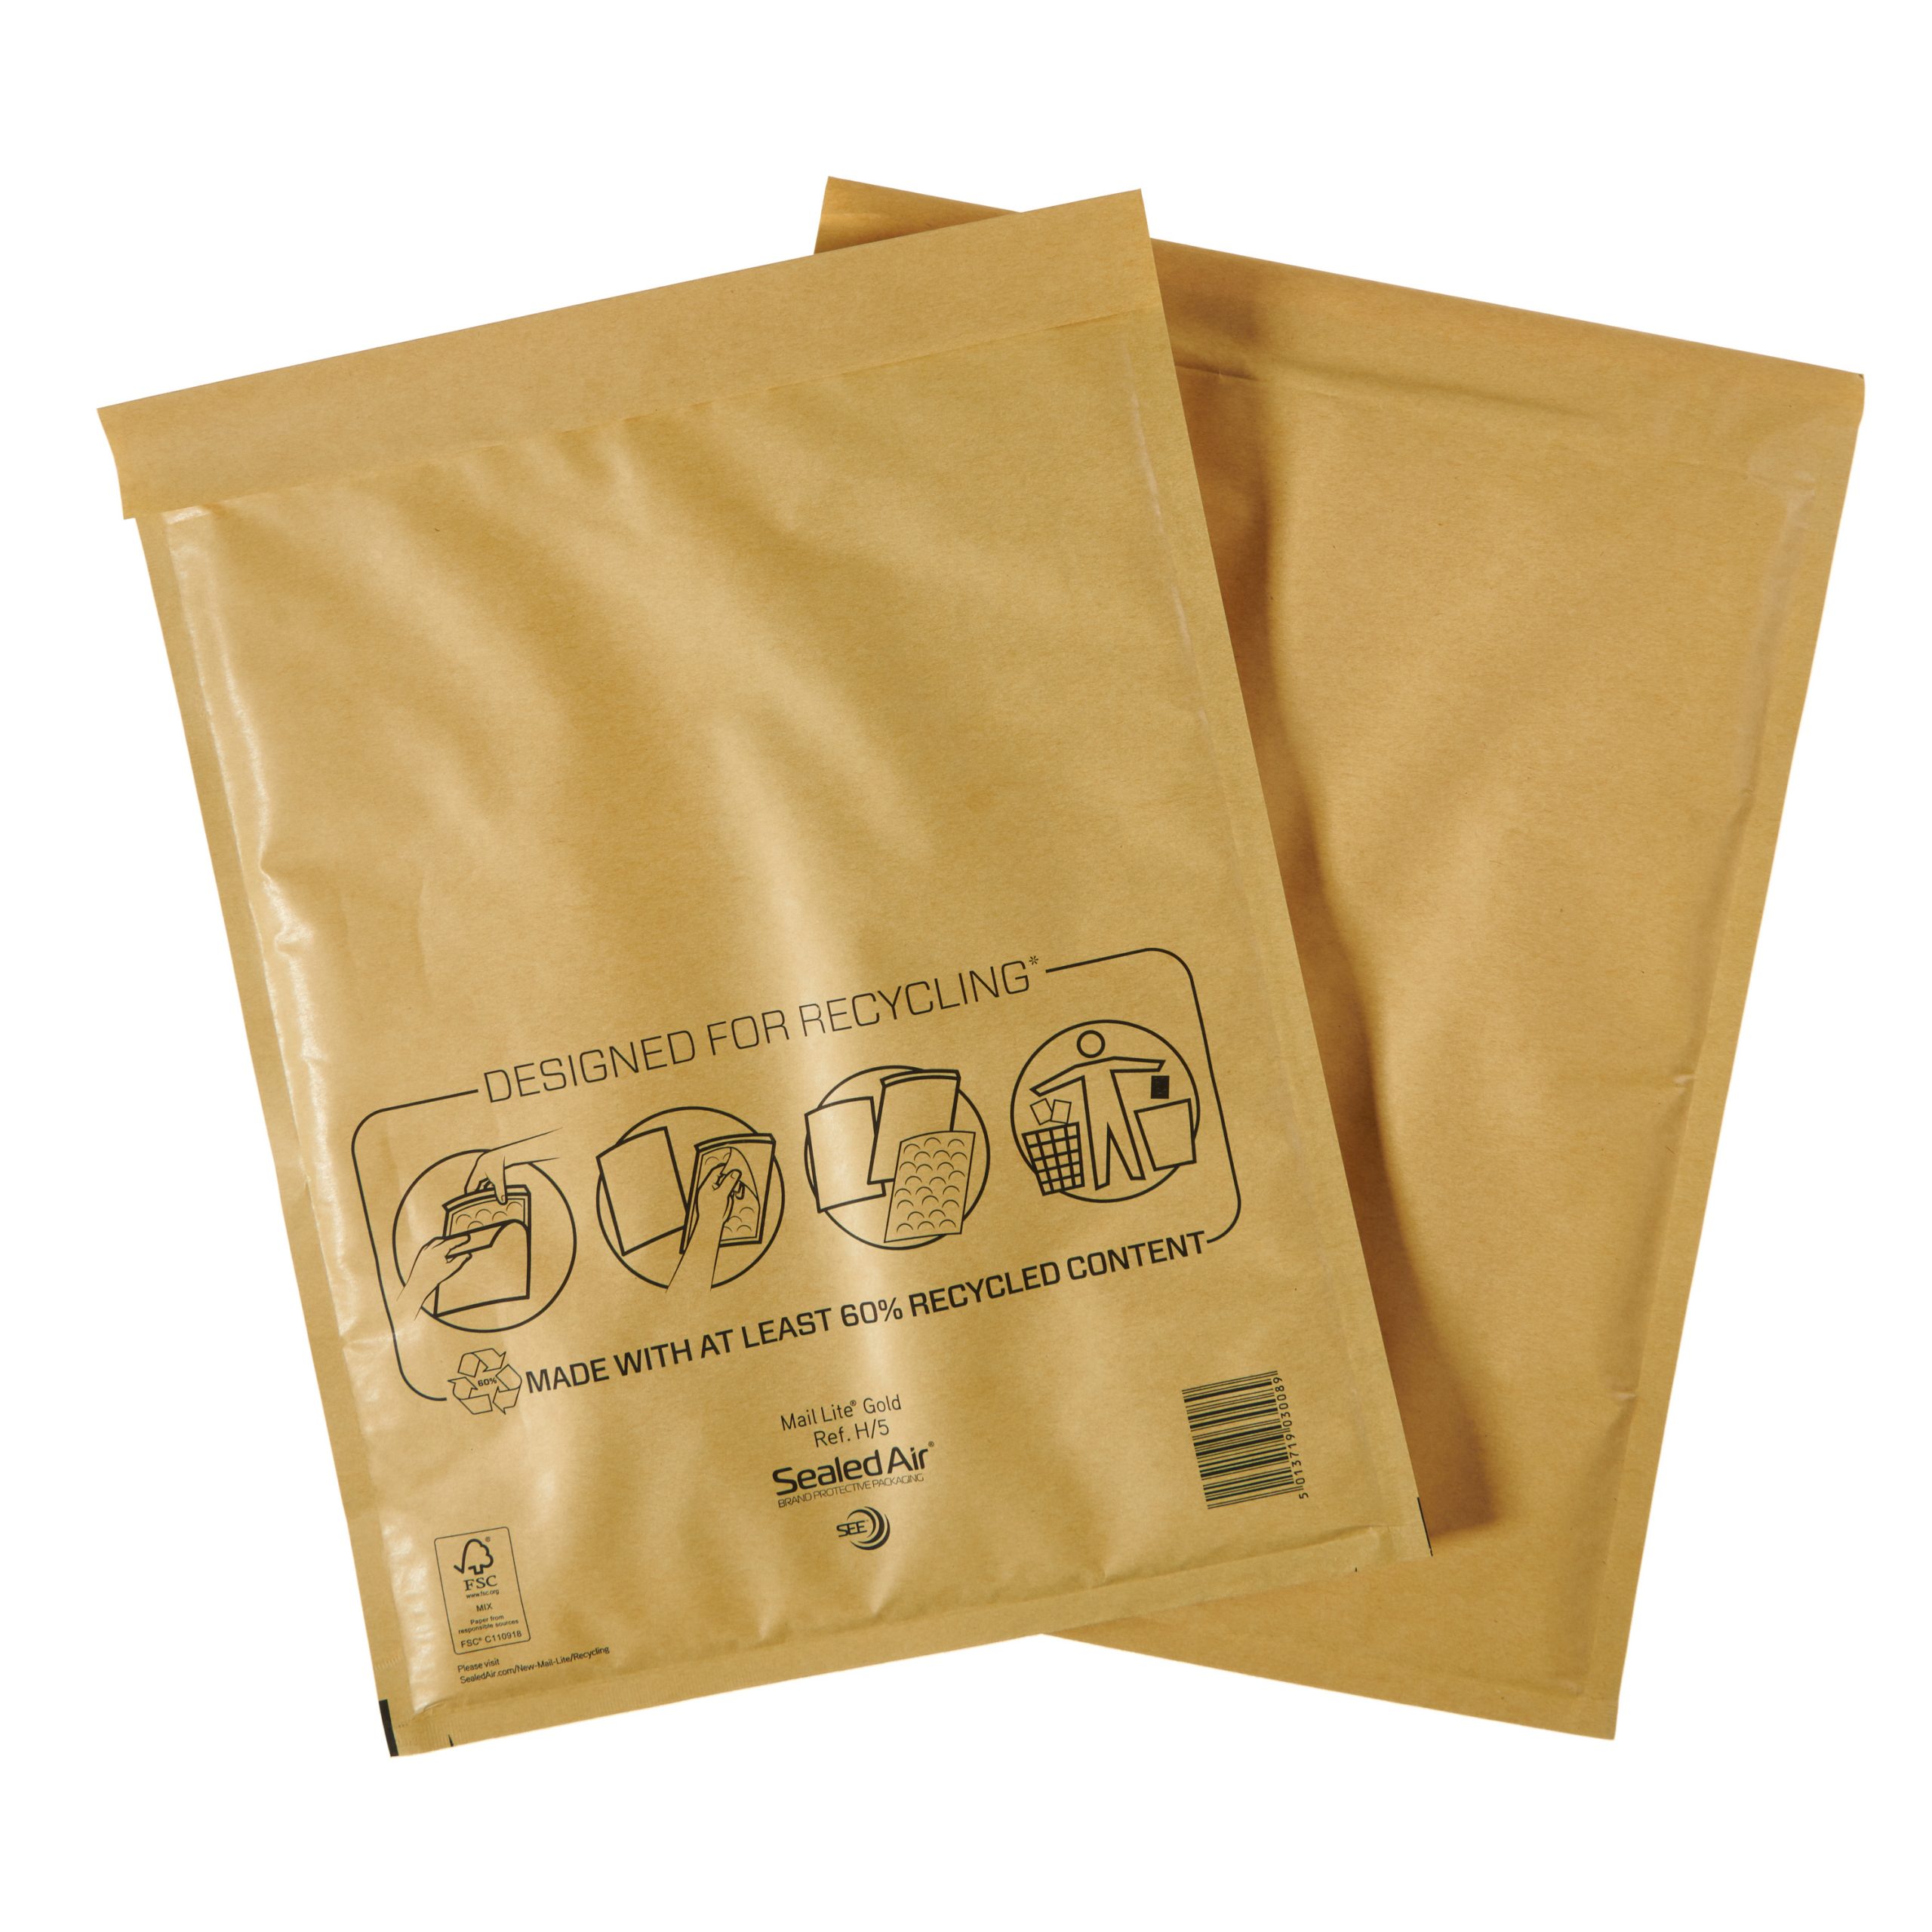 GOLD WHITE MAIL LITE SIZE QUALITY PADDED BUBBLE MAIL ENVELOPE POSTAL BAGS CS 